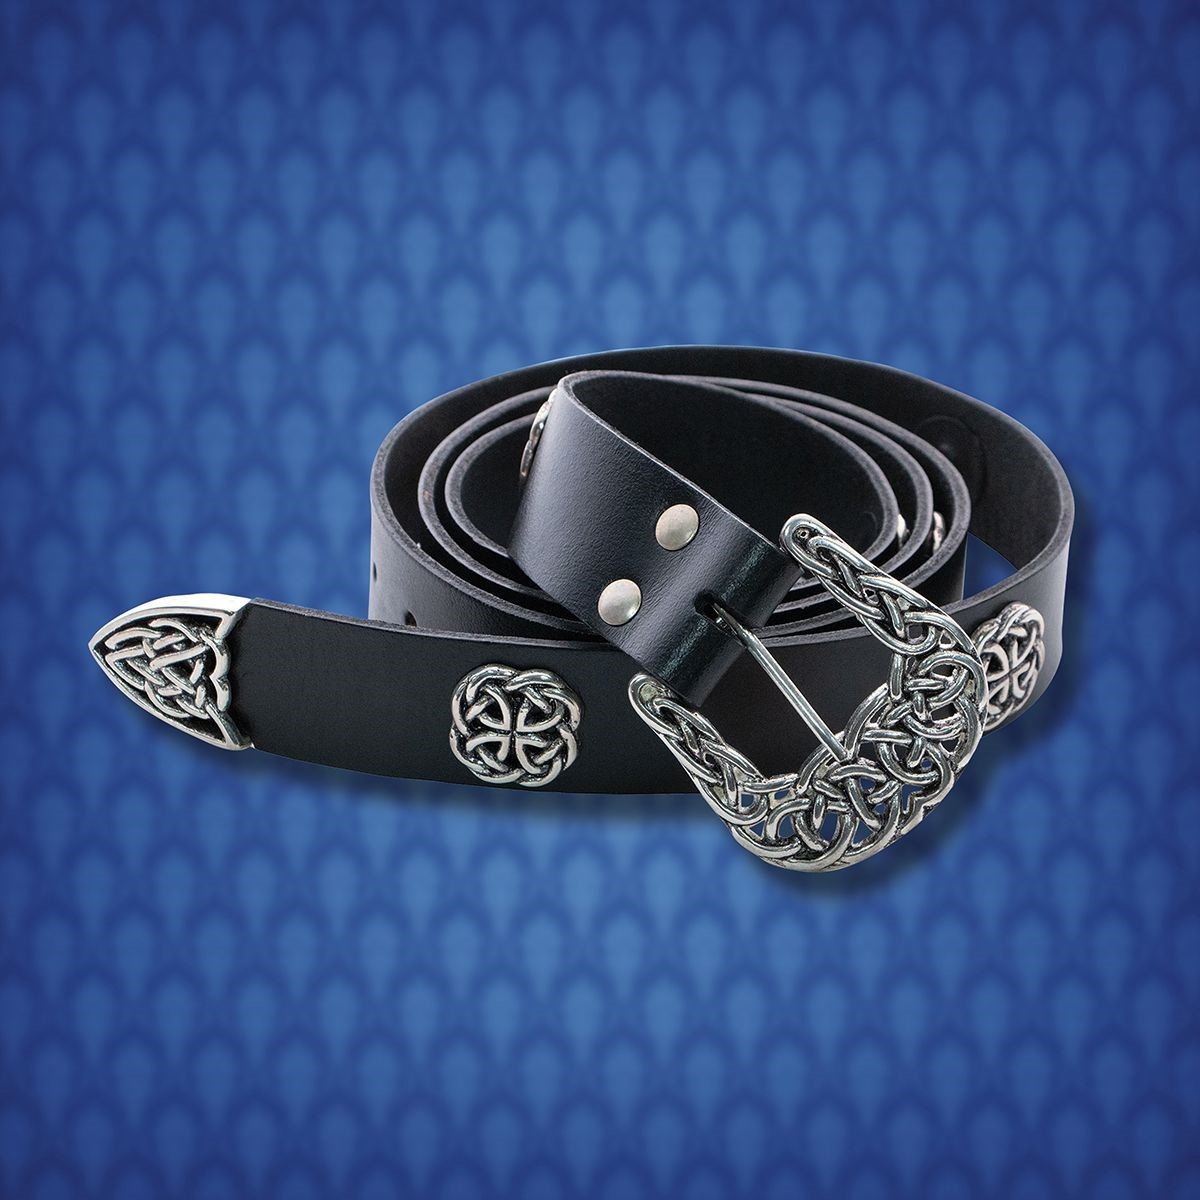  Noble’s Black Leather Belt with Silver Fittings